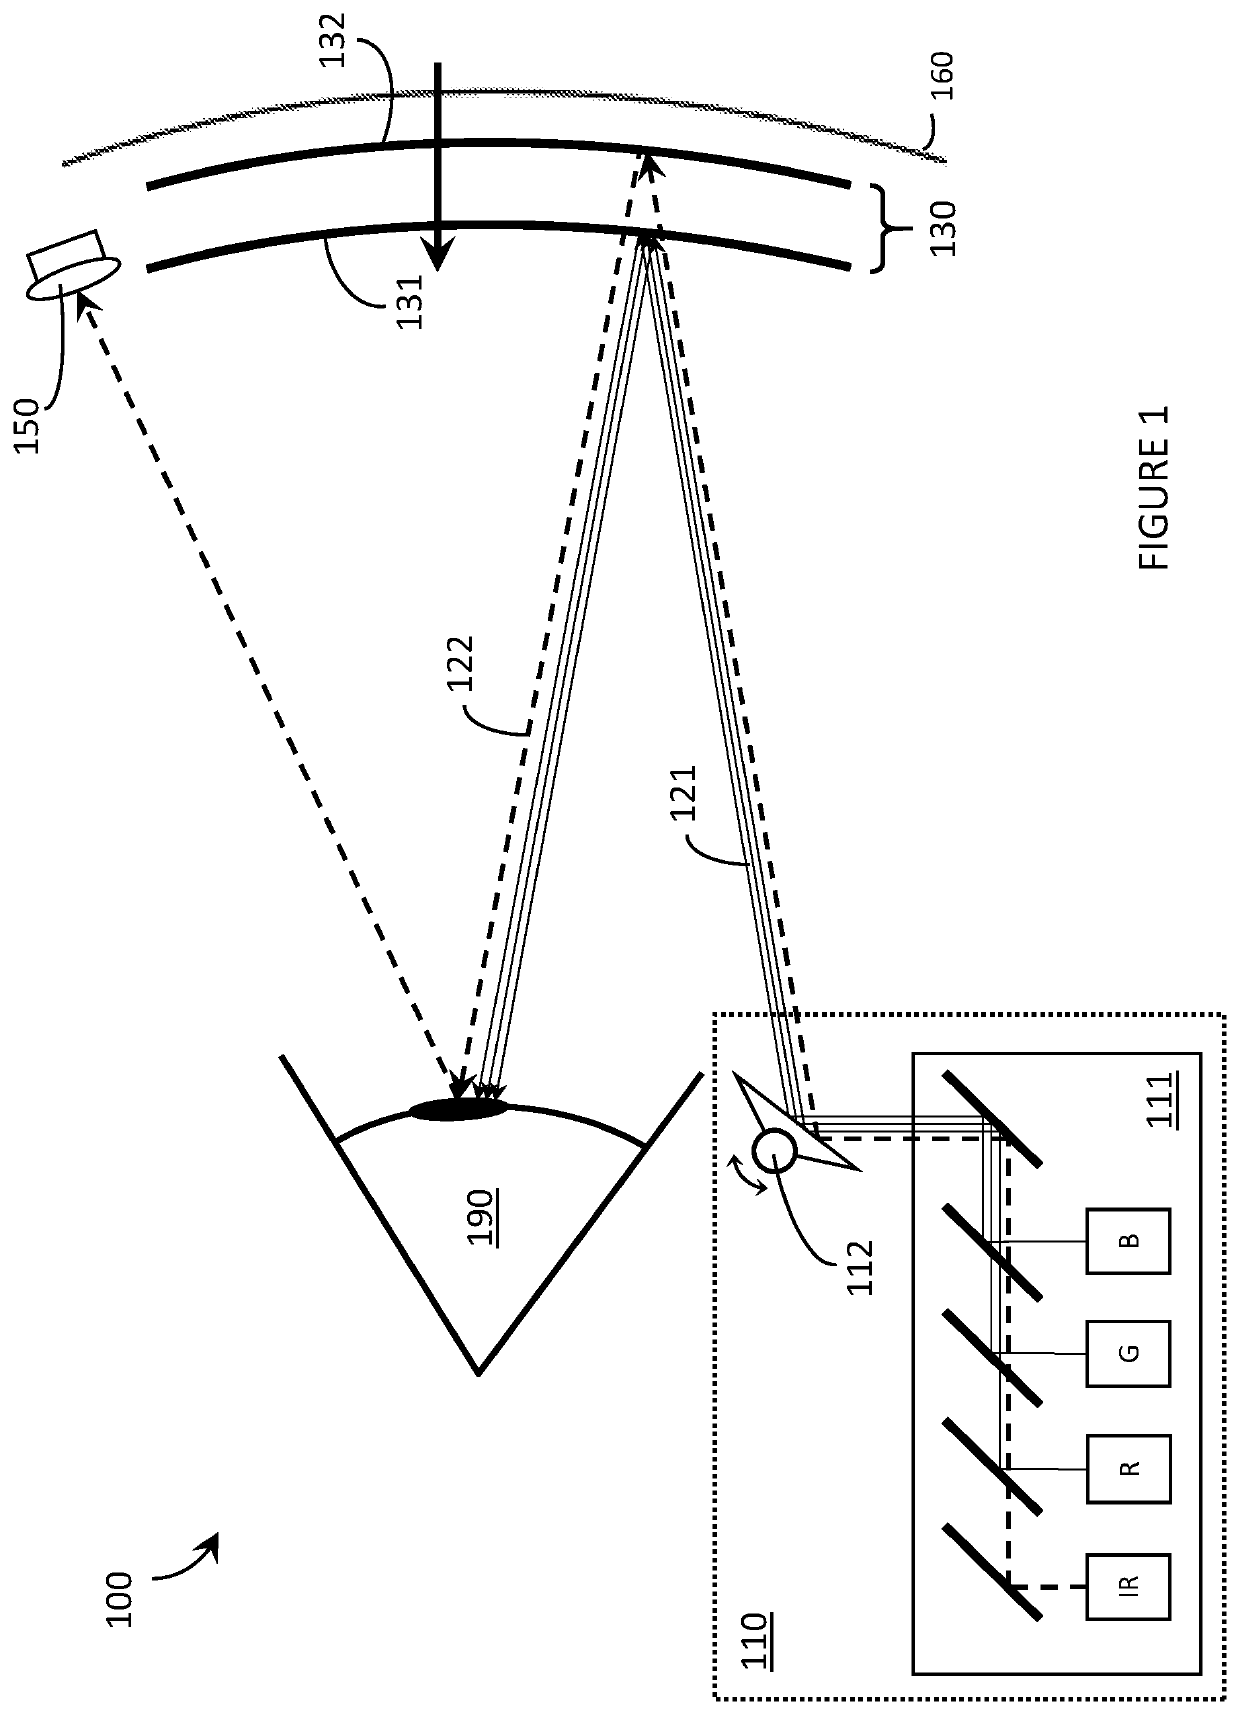 Dynamic calibration methods for eye tracking systems of wearable heads-up displays